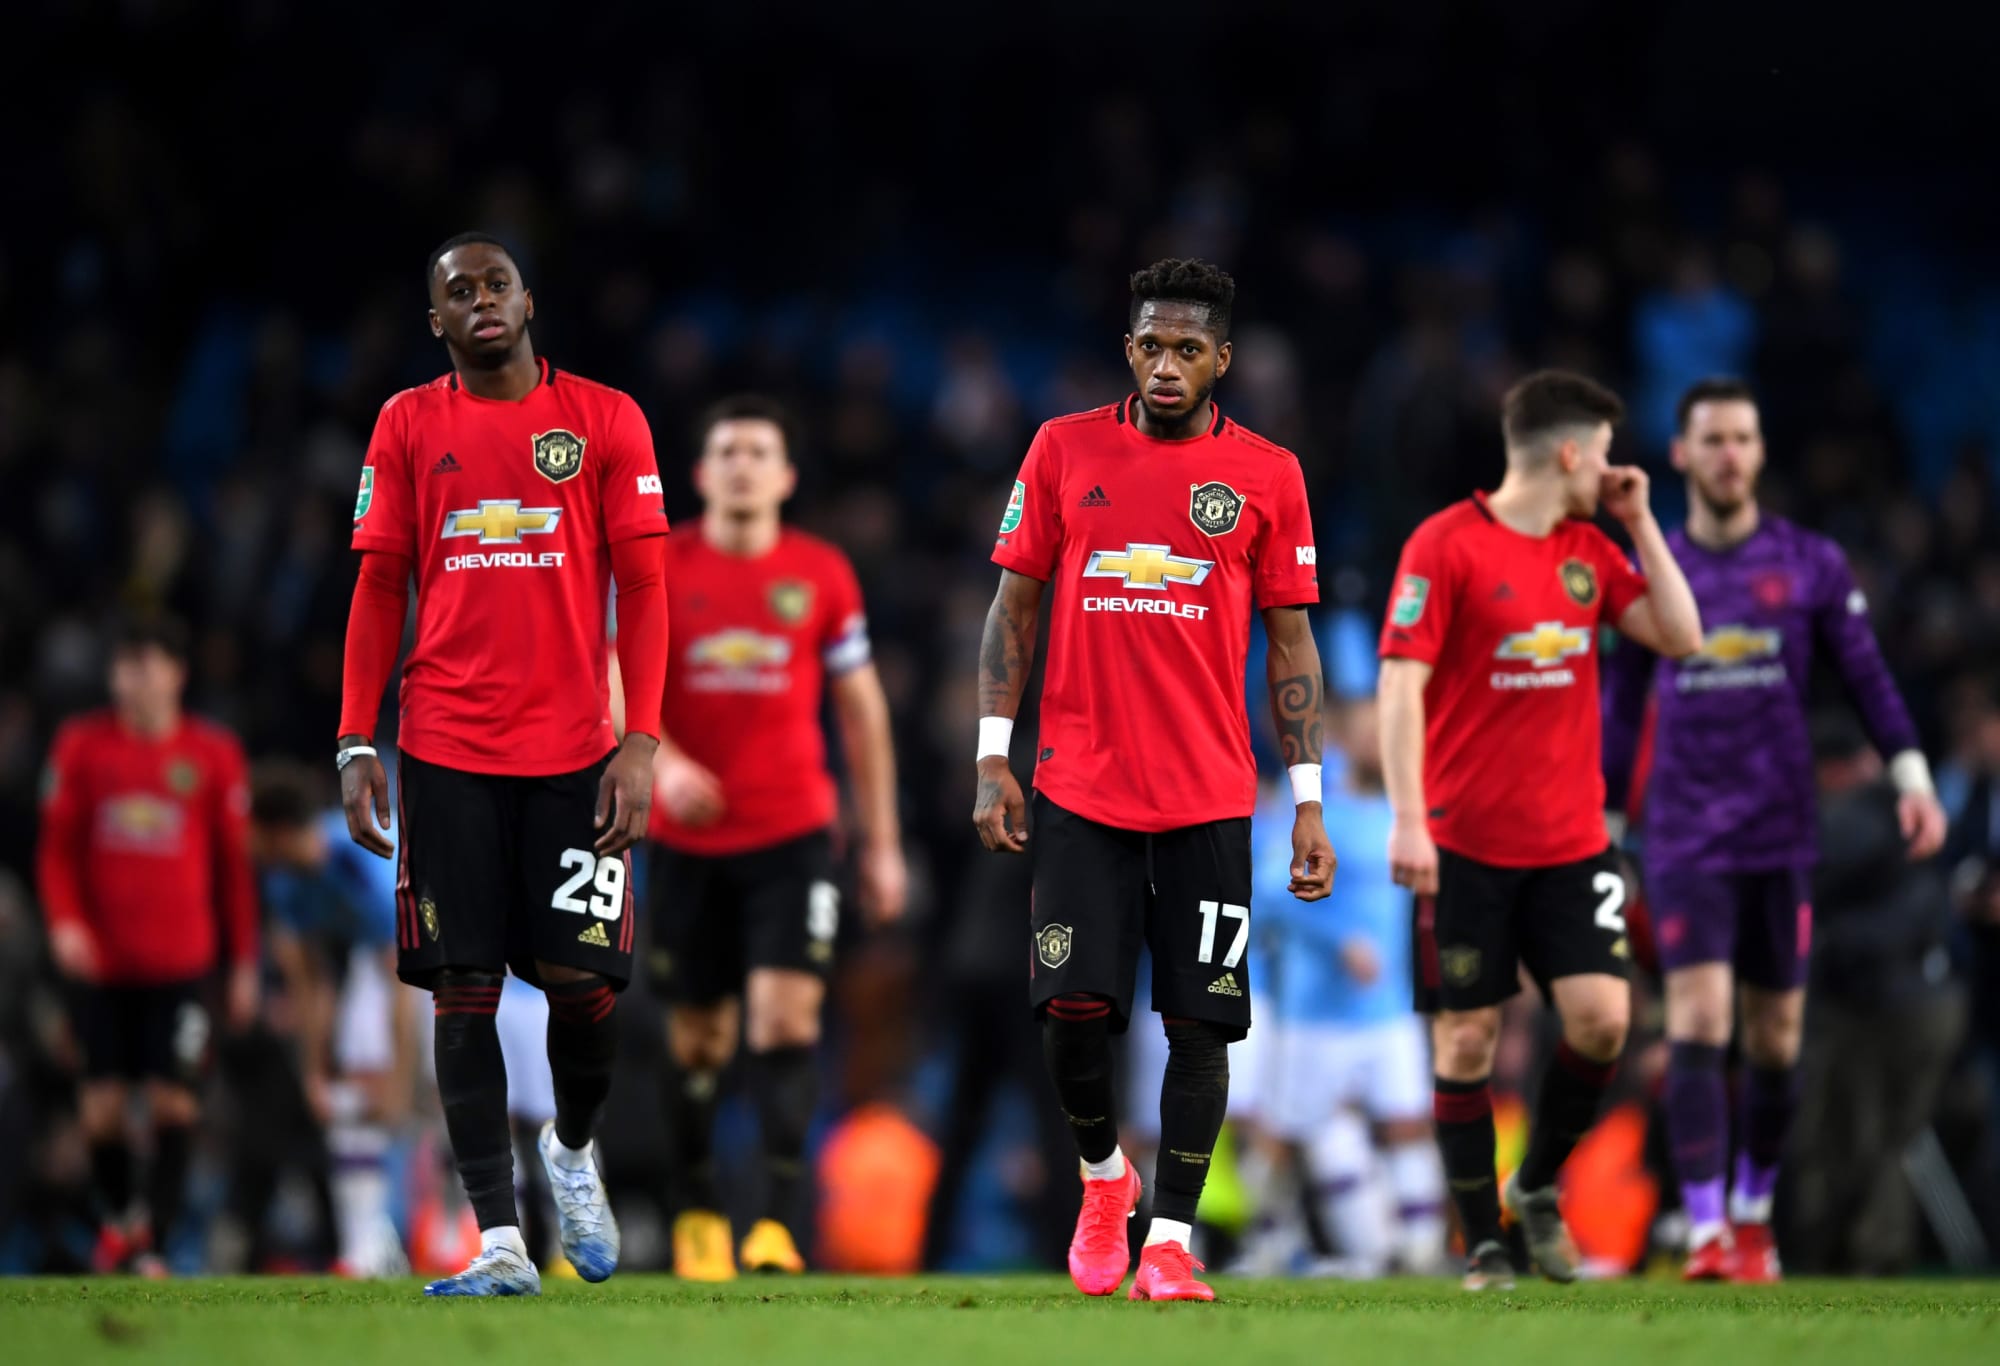 Manchester City vs. Manchester United: United just miss out on final